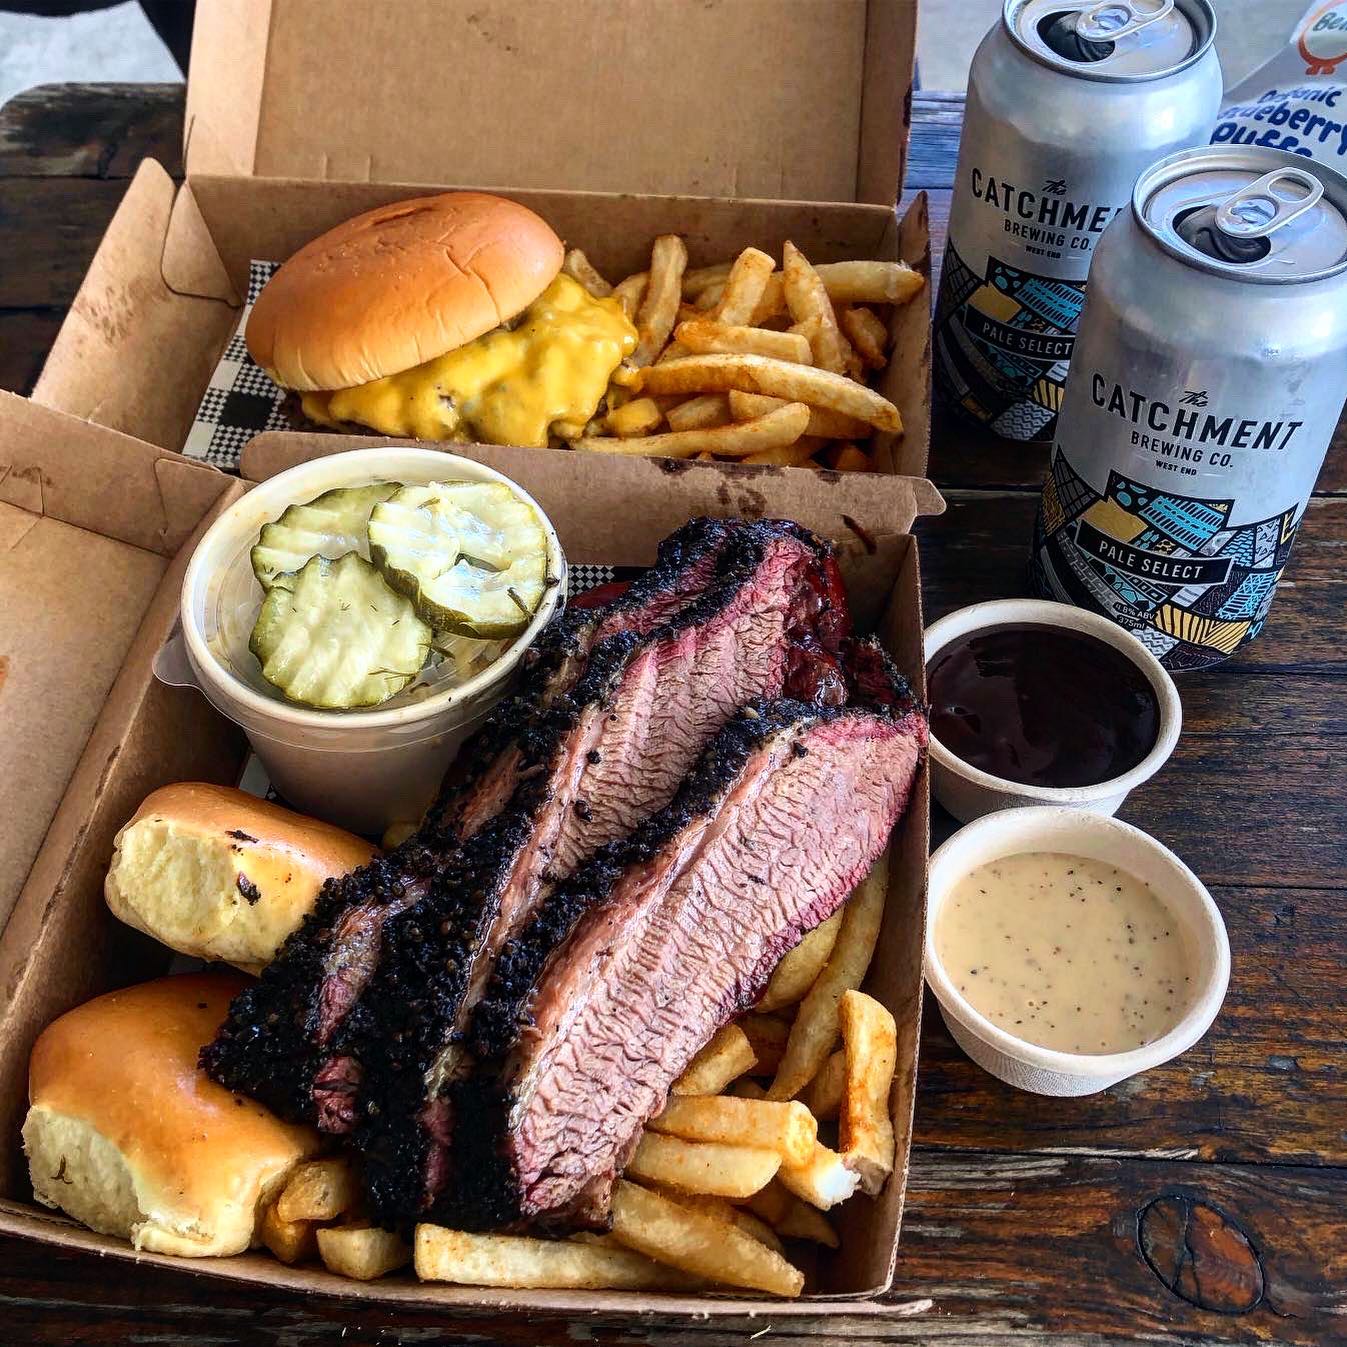 a takeaway box of brisket, fries and pickles